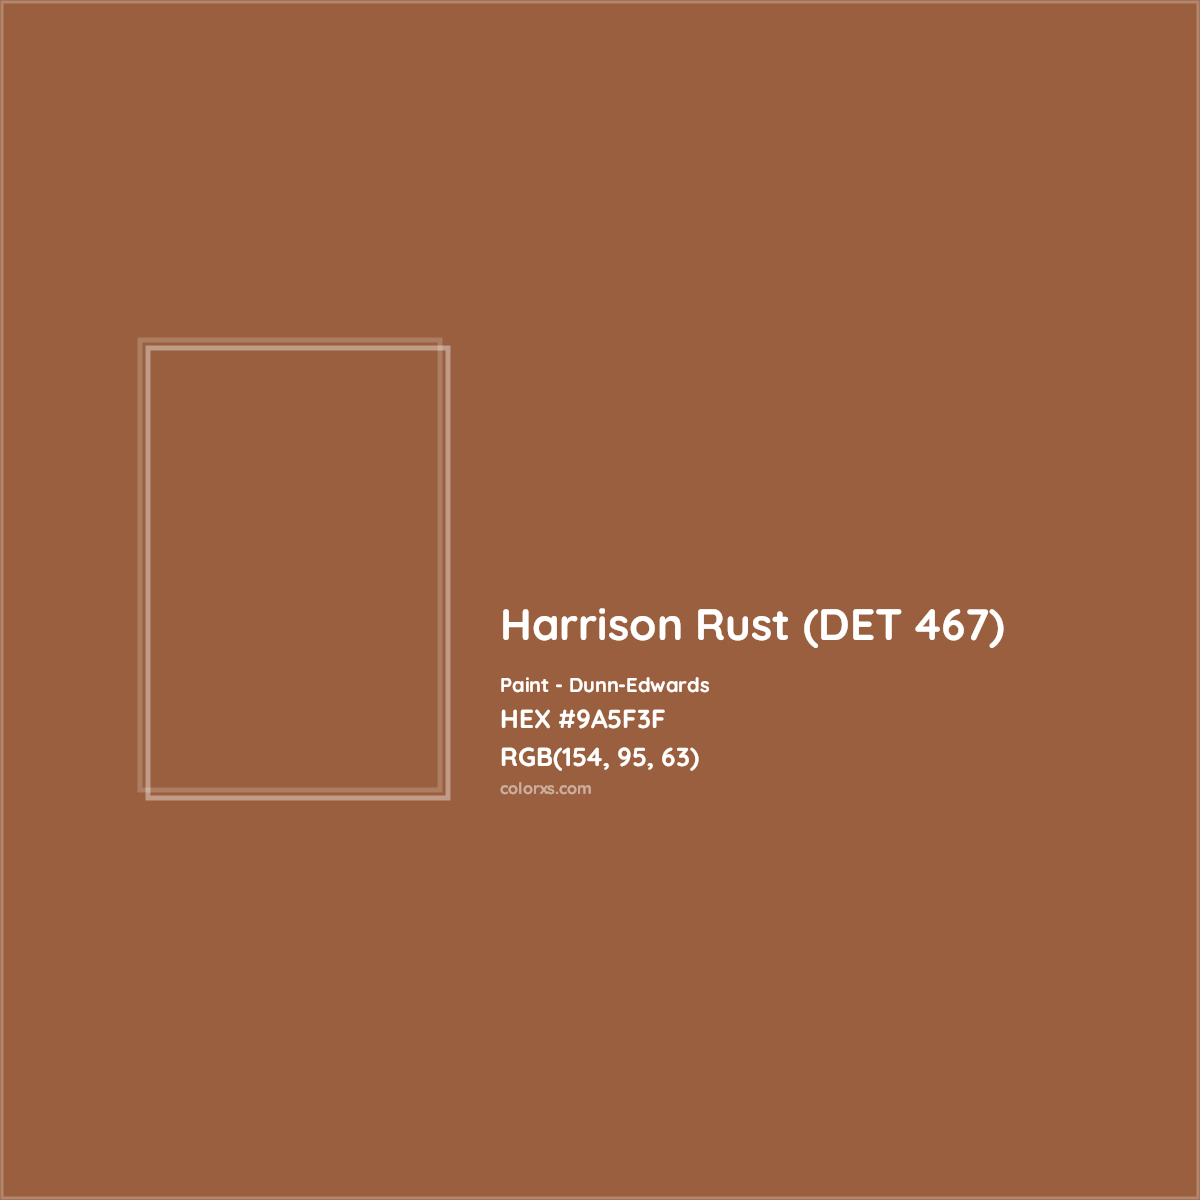 HEX #9A5F3F Harrison Rust (DET 467) Paint Dunn-Edwards - Color Code